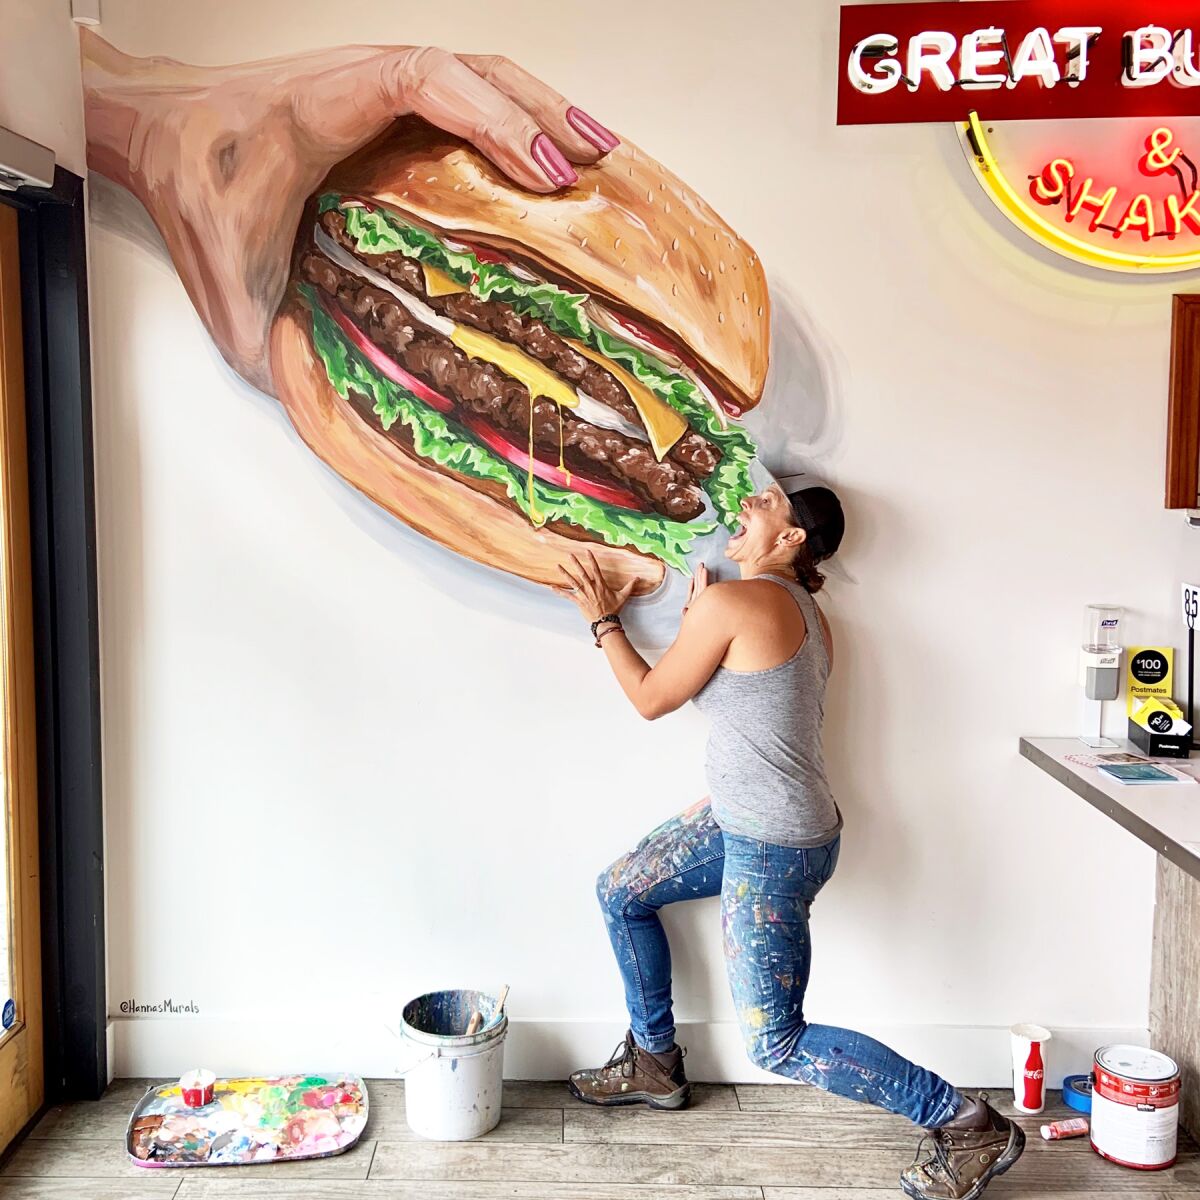 Hanna Daly with the oversized burger she painted at Biggie’s Burgers, 4631 Mission Blvd. It makes for great selfies.